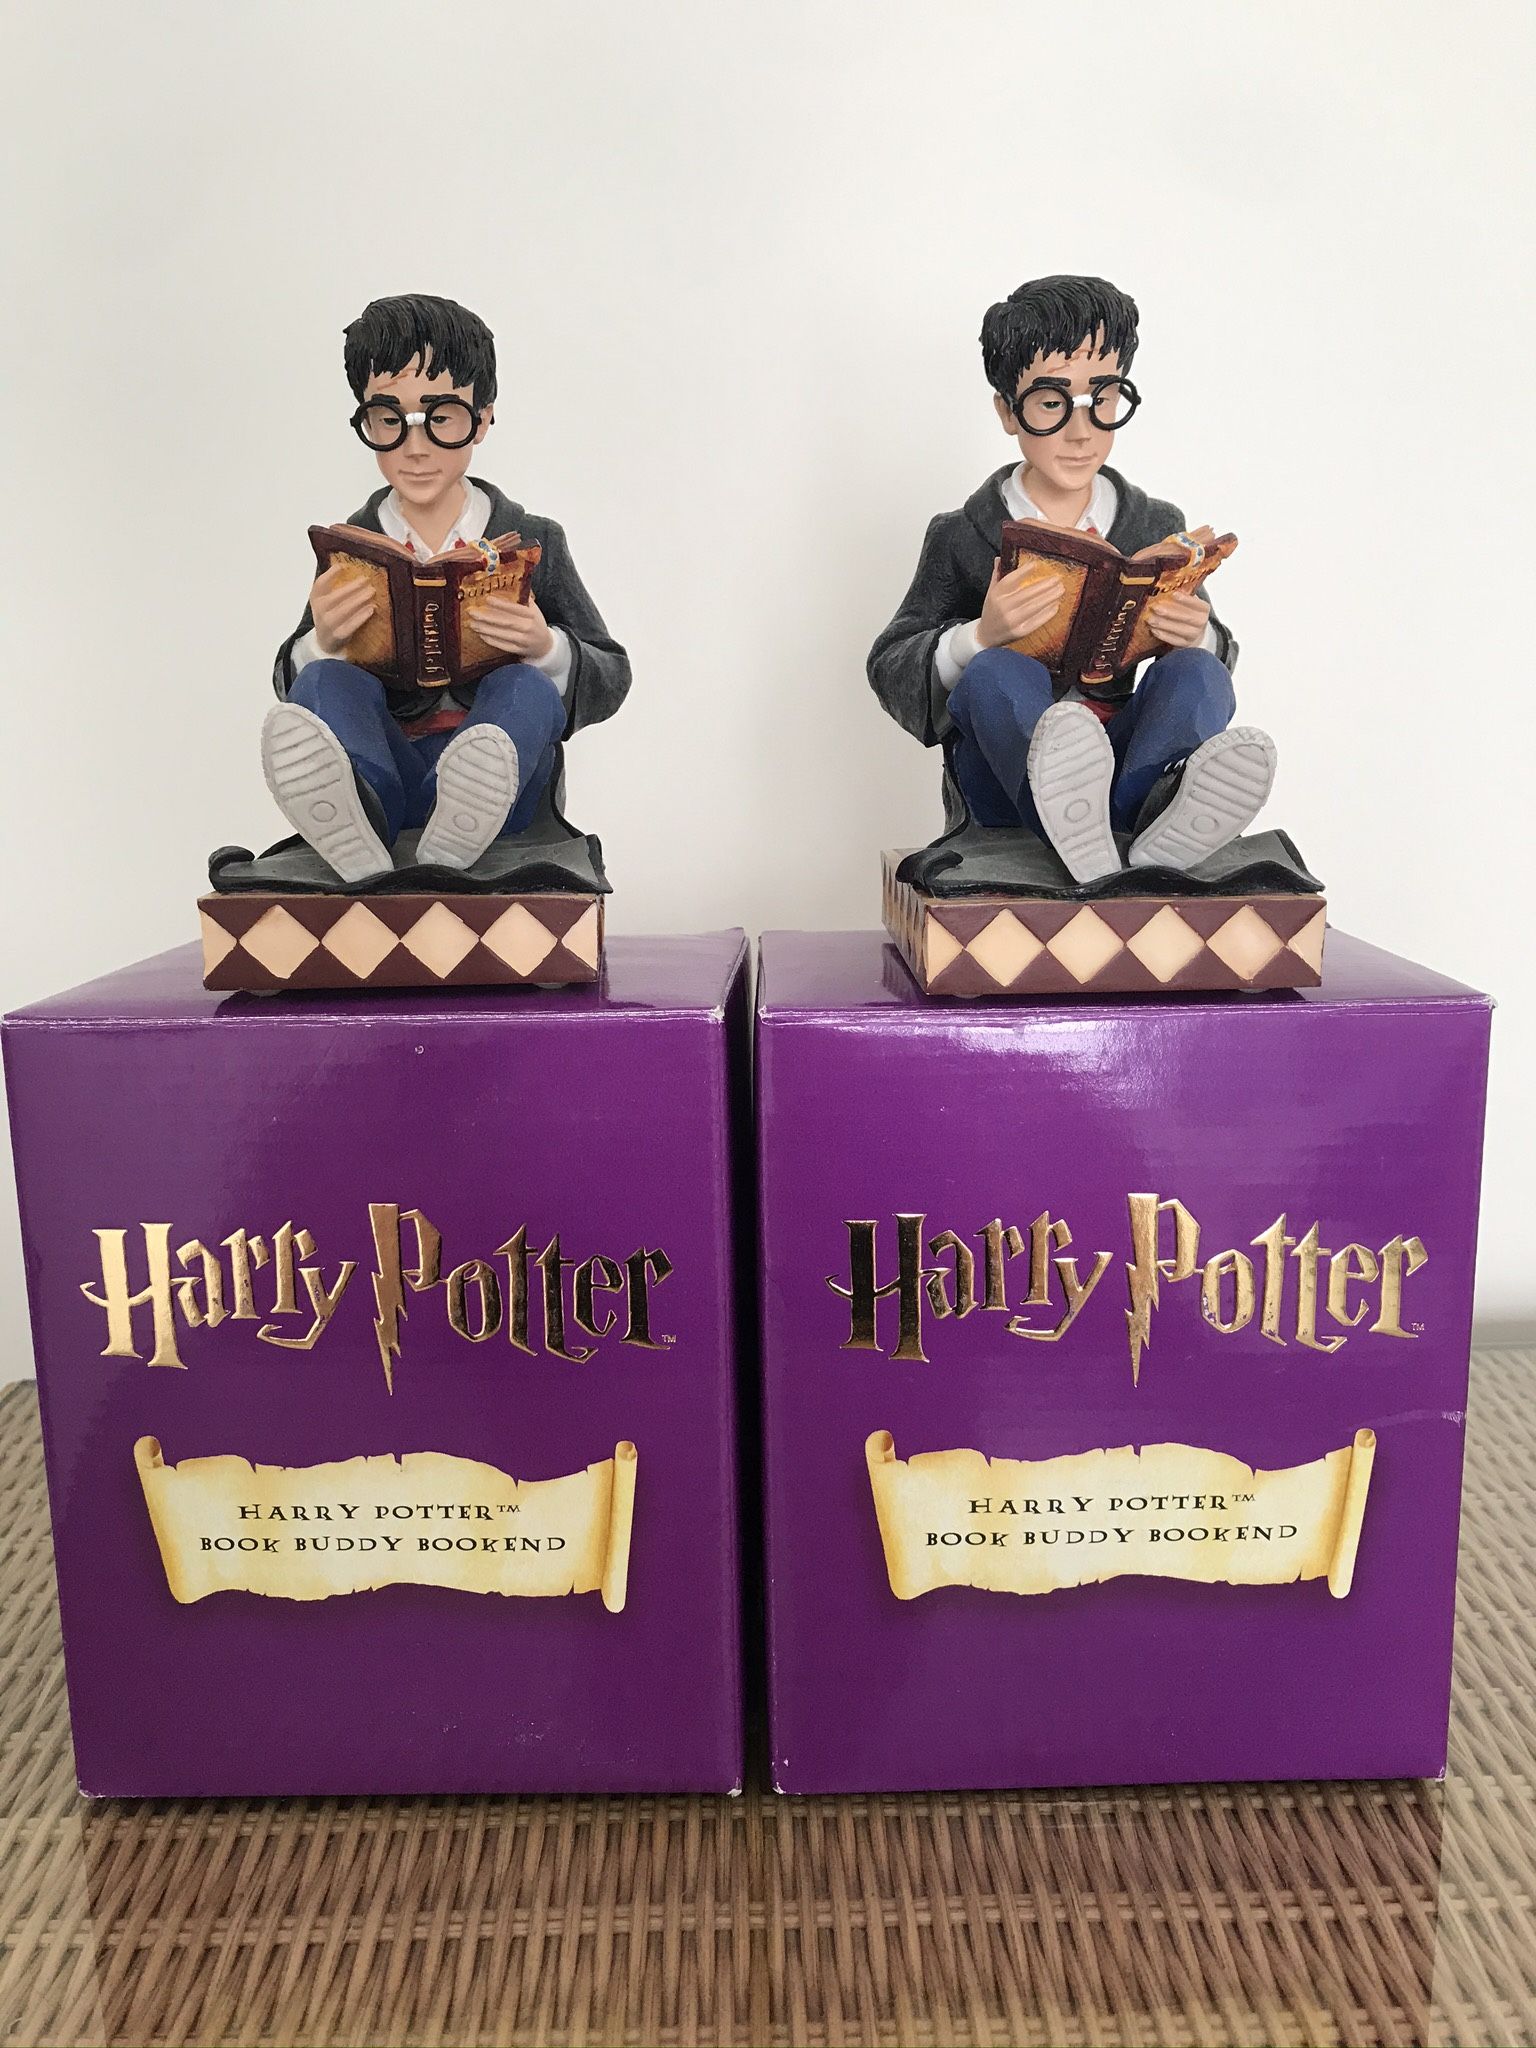 Harry Potter Bookends And 7 Hardback Books 